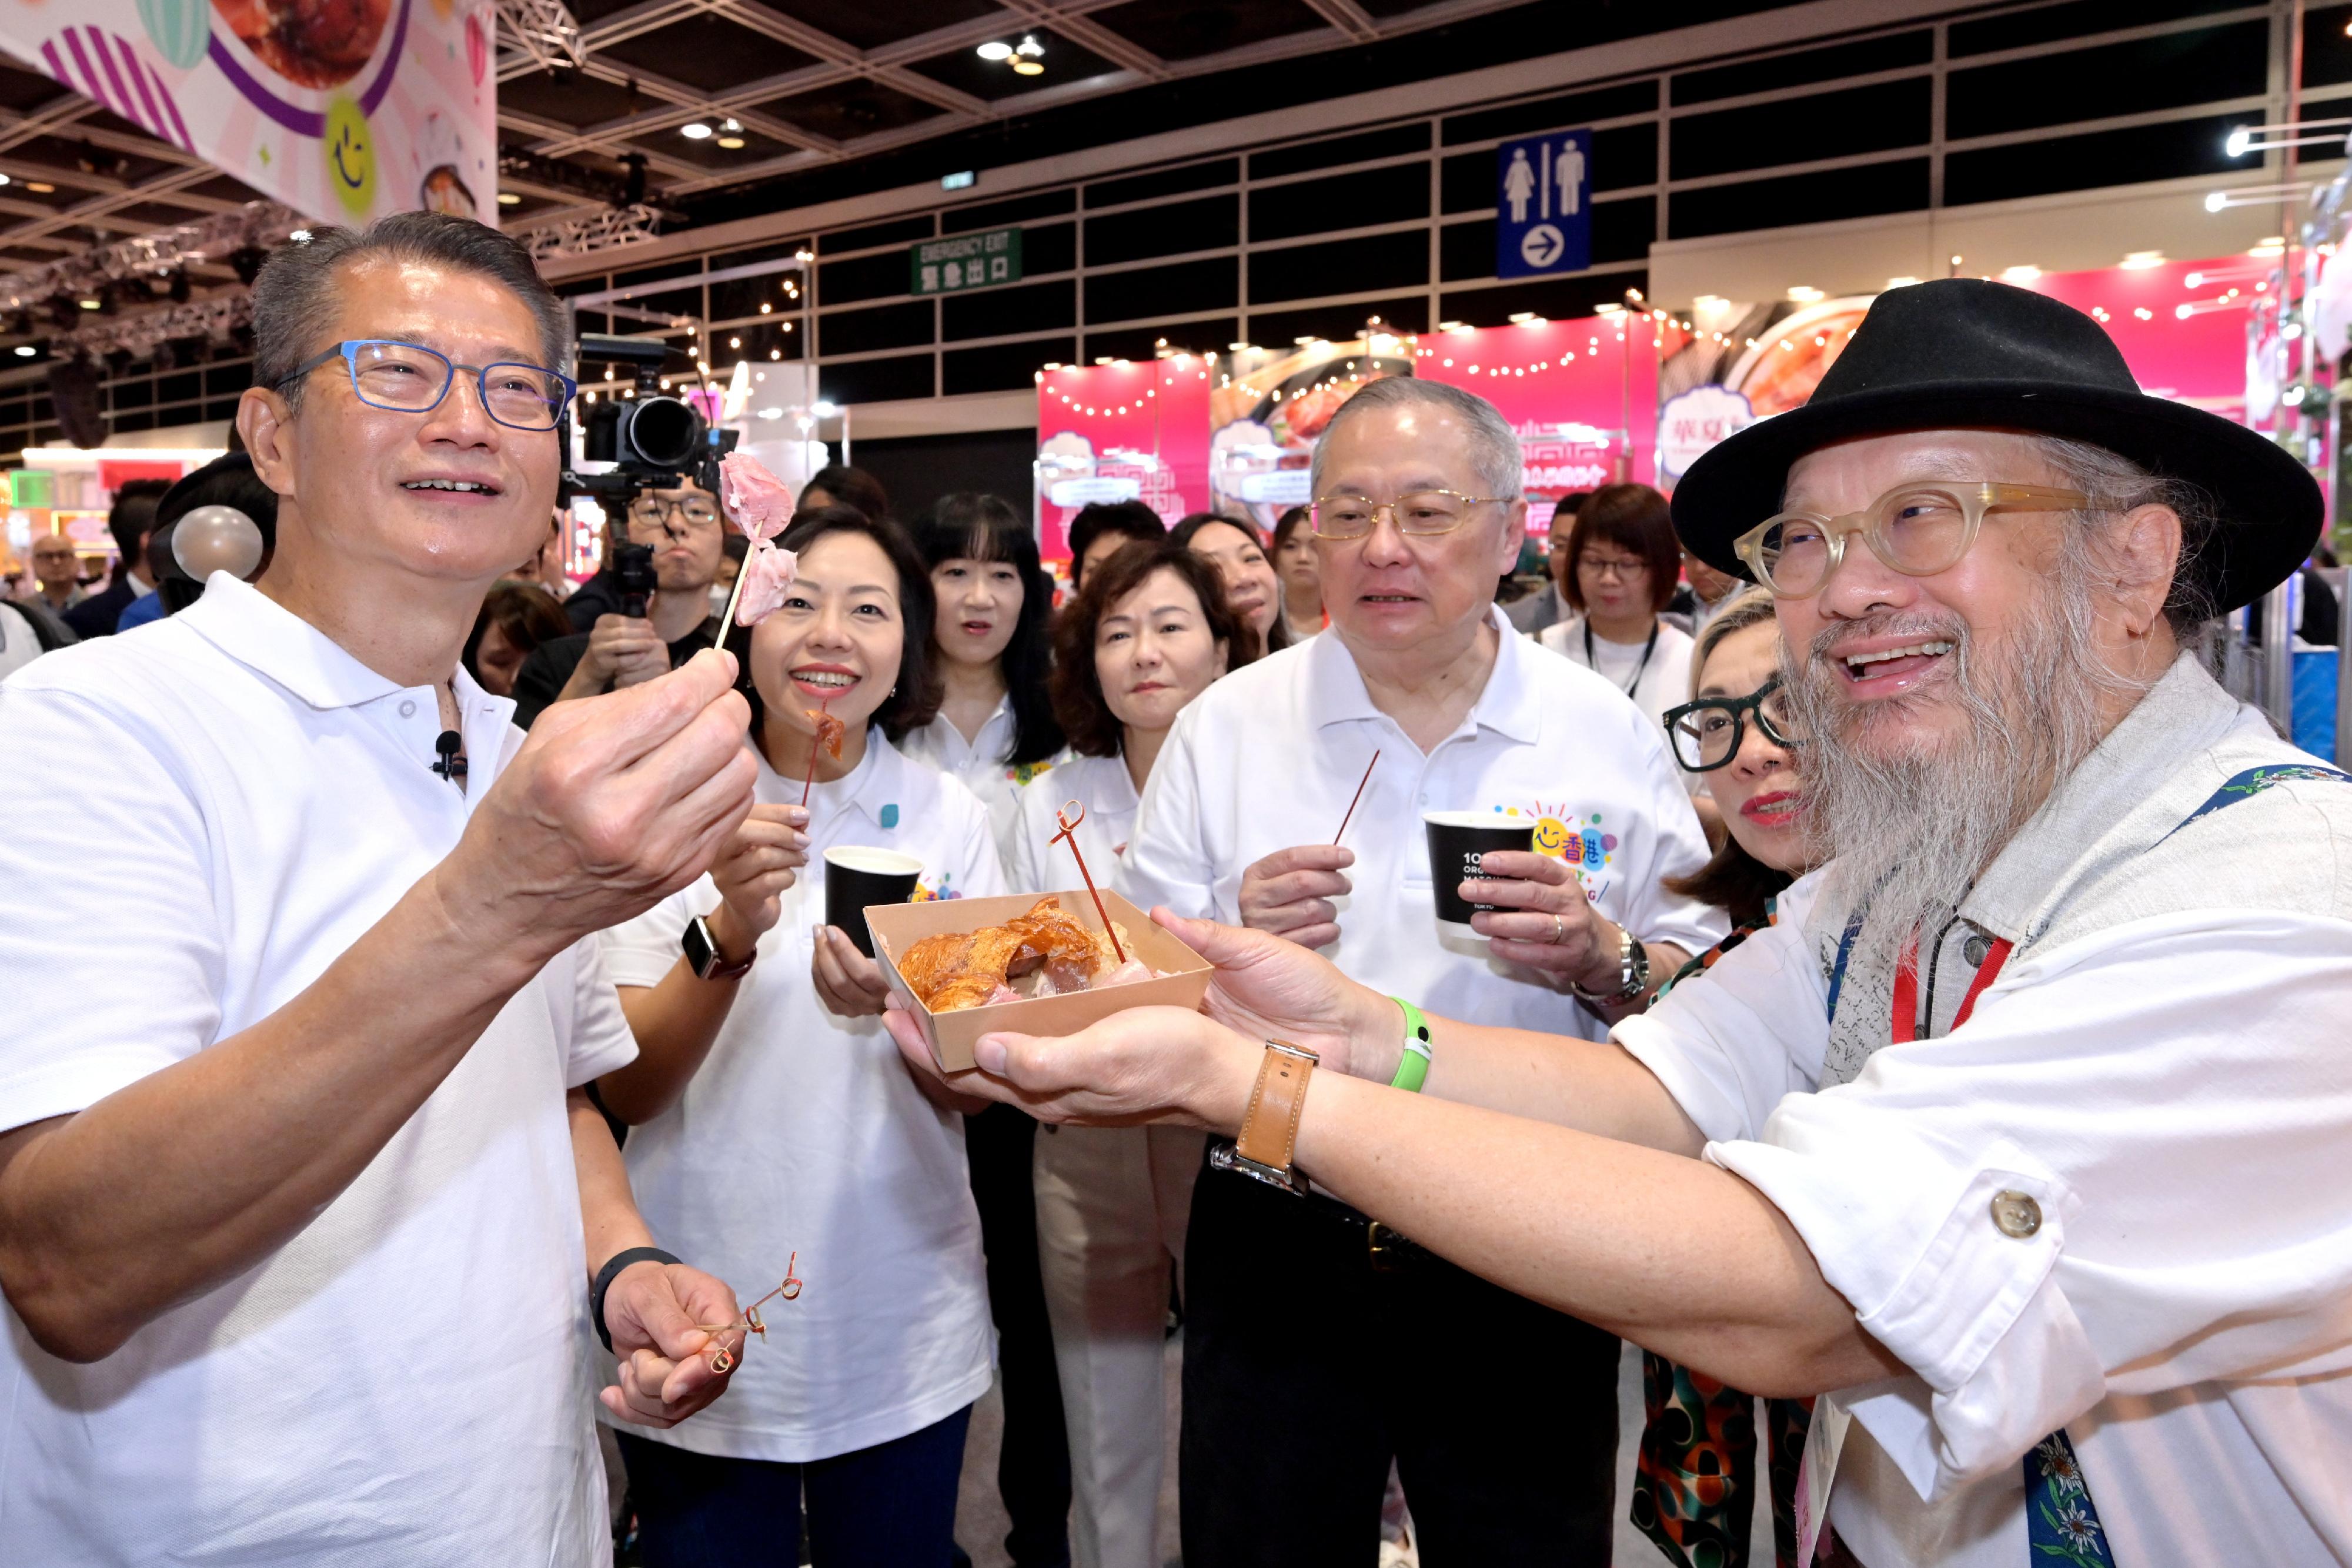 The Financial Secretary, Mr Paul Chan, officiated at the opening ceremony of the first "Happy Hong Kong" Gourmet Marketplace today (April 29). Photo shows Mr Chan (first left), accompanied by Non-official Member of the Executive Council, Legislative Council Member (Catering), Mr Tommy Cheung (second right); and the Secretary for Home and Youth Affairs, Miss Alice Mak (second left), tasting food at the Gourmet Marketplace.